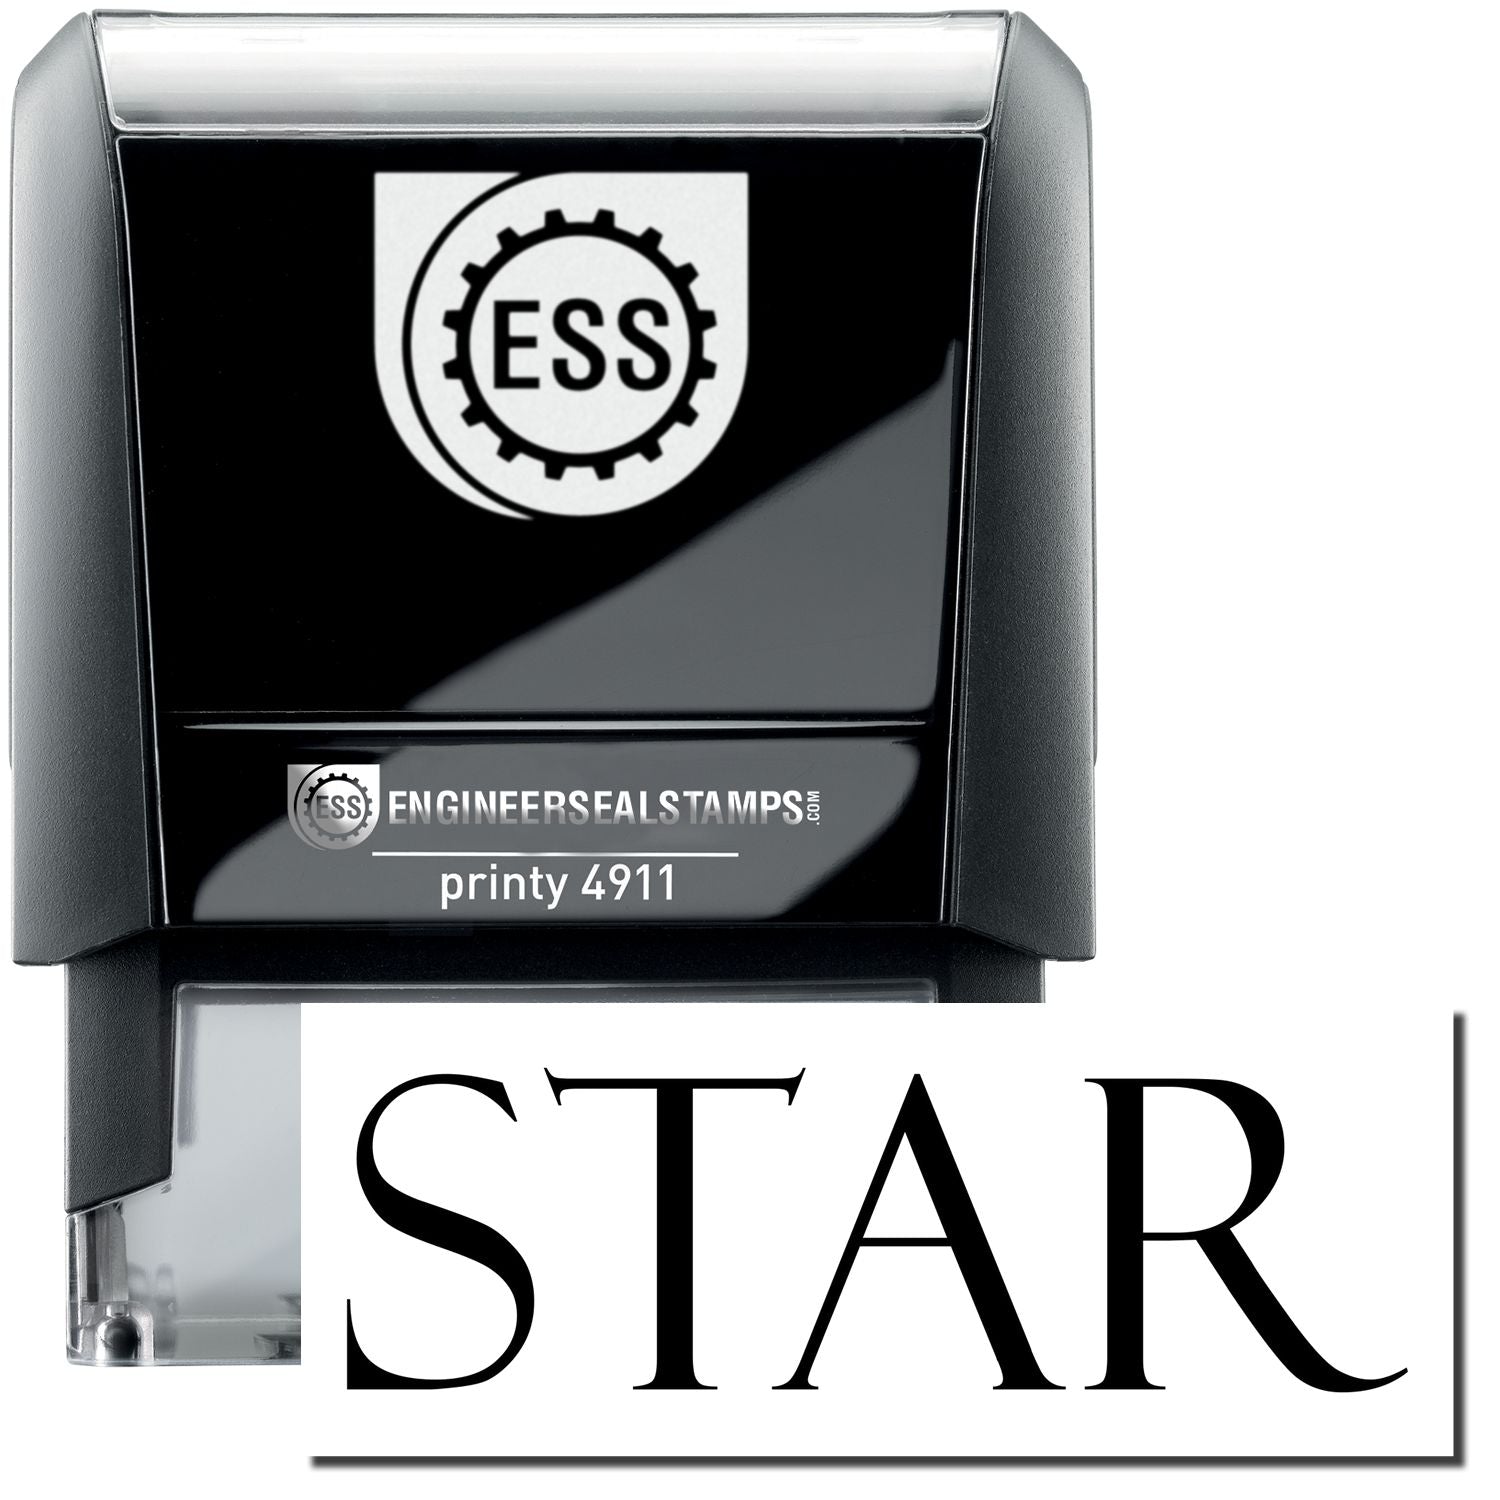 A self-inking stamp with a stamped image showing how the text "STAR" is displayed after stamping.